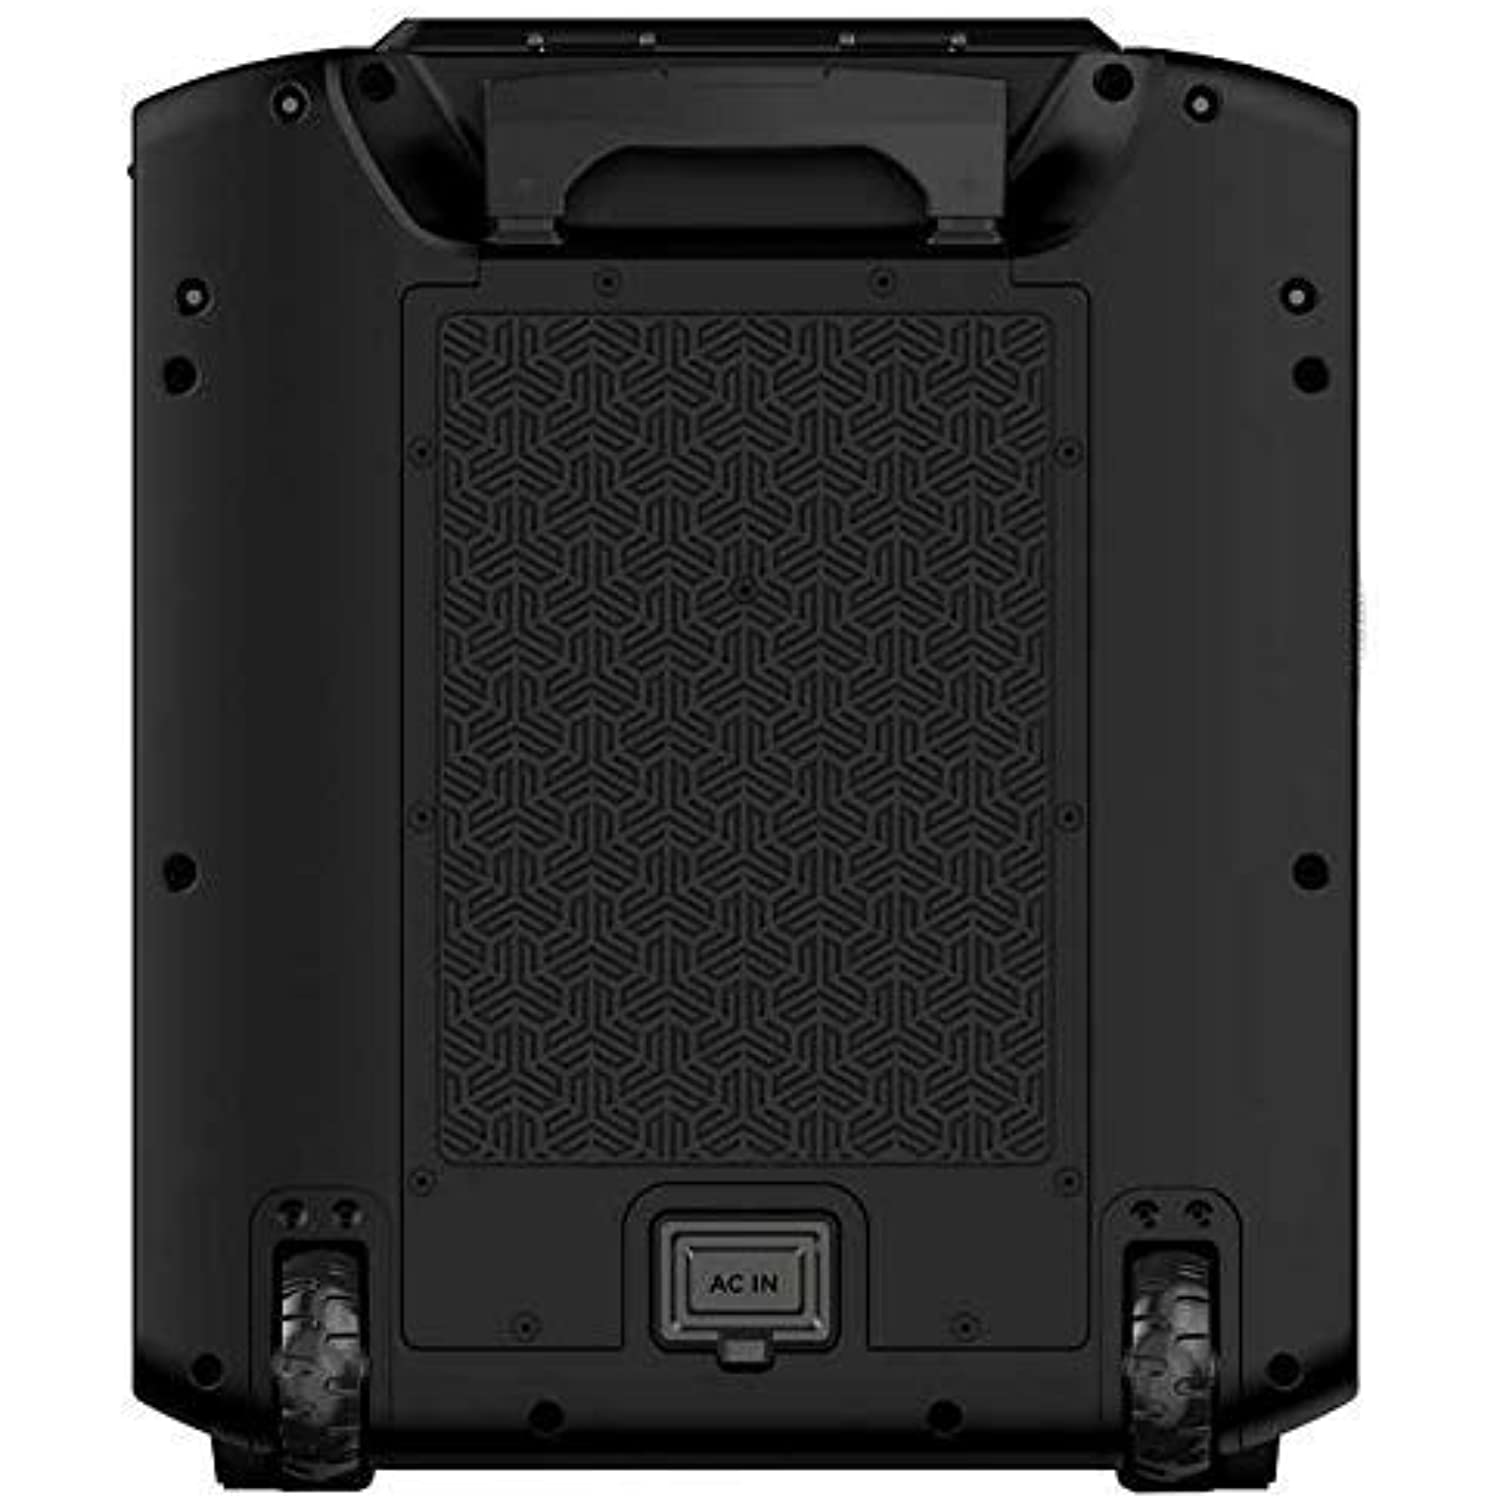 Restored ION Pathfinder 280 All-Weather Speaker with Premium Wide-Angle Sound (Refurbished) - image 5 of 9